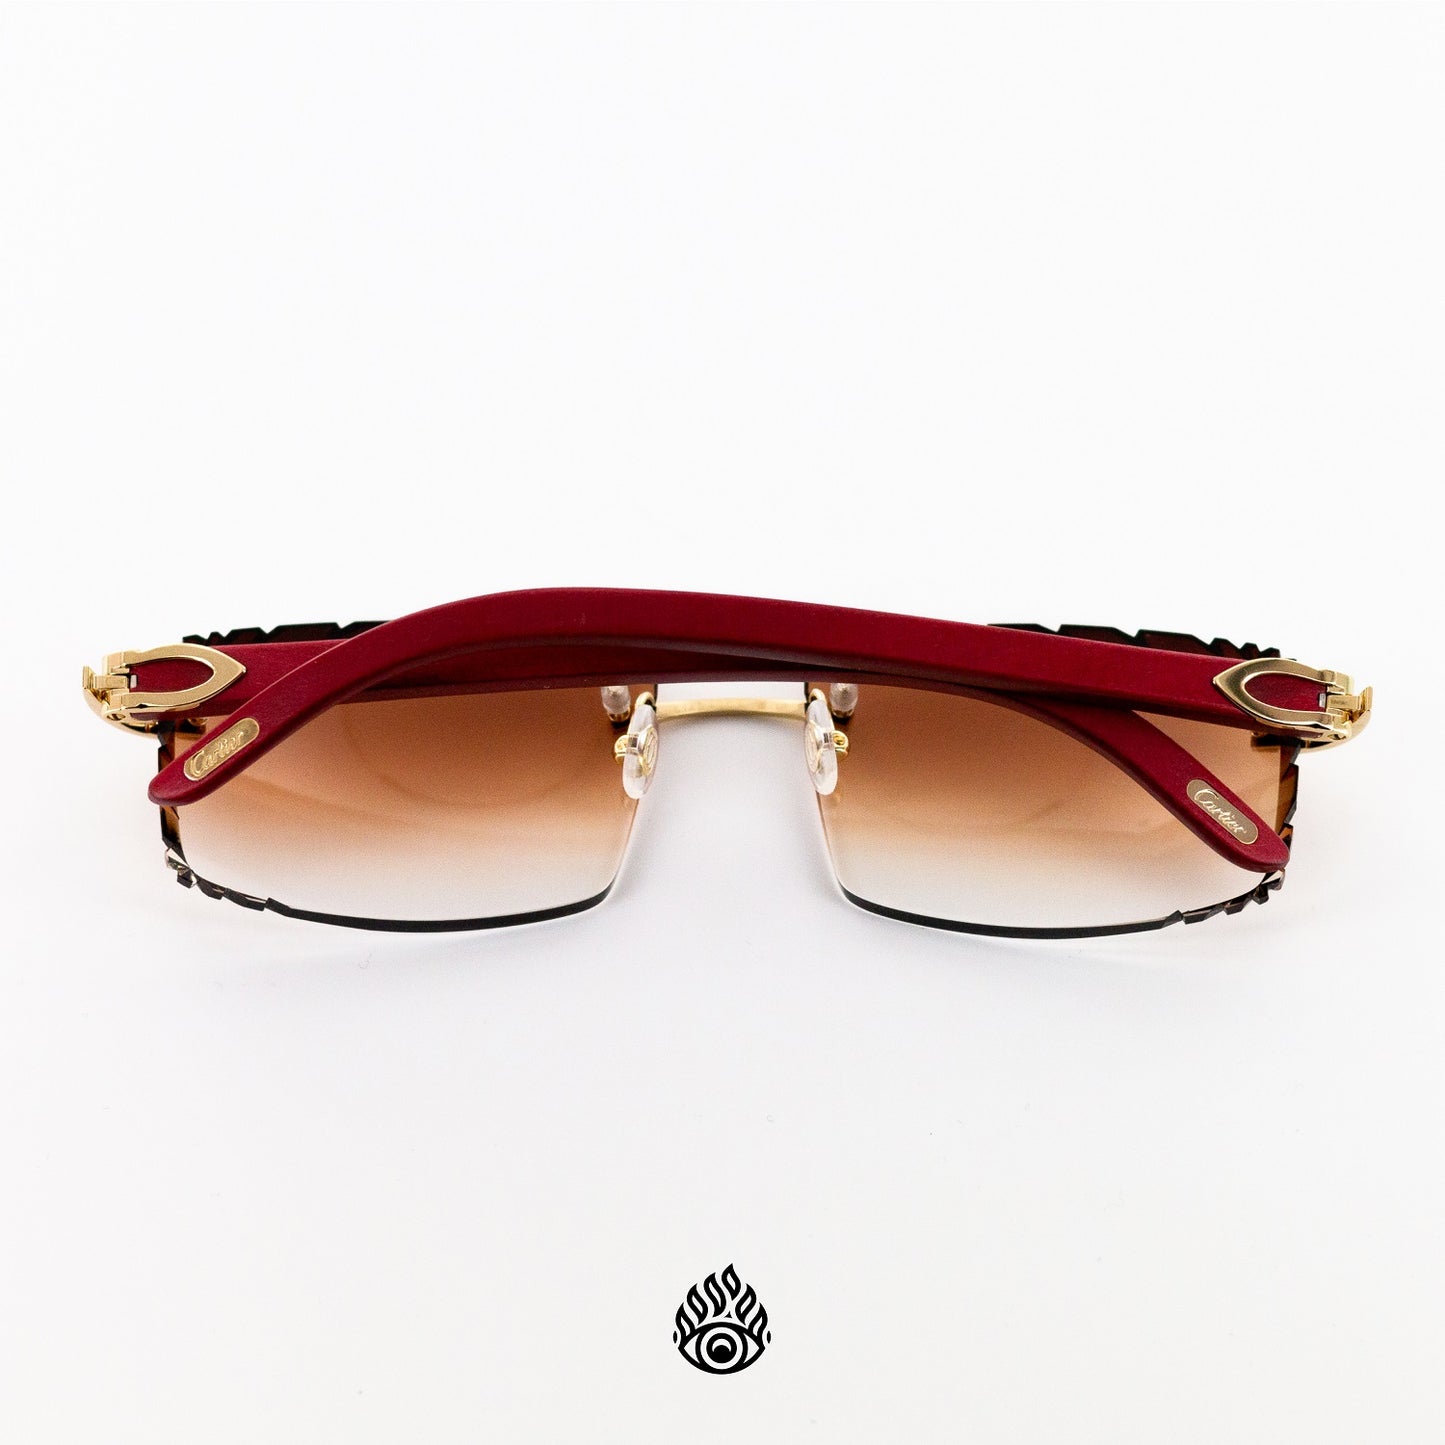 Cartier Red Wood Glasses with Gold C Decor and Honey Brown Lens